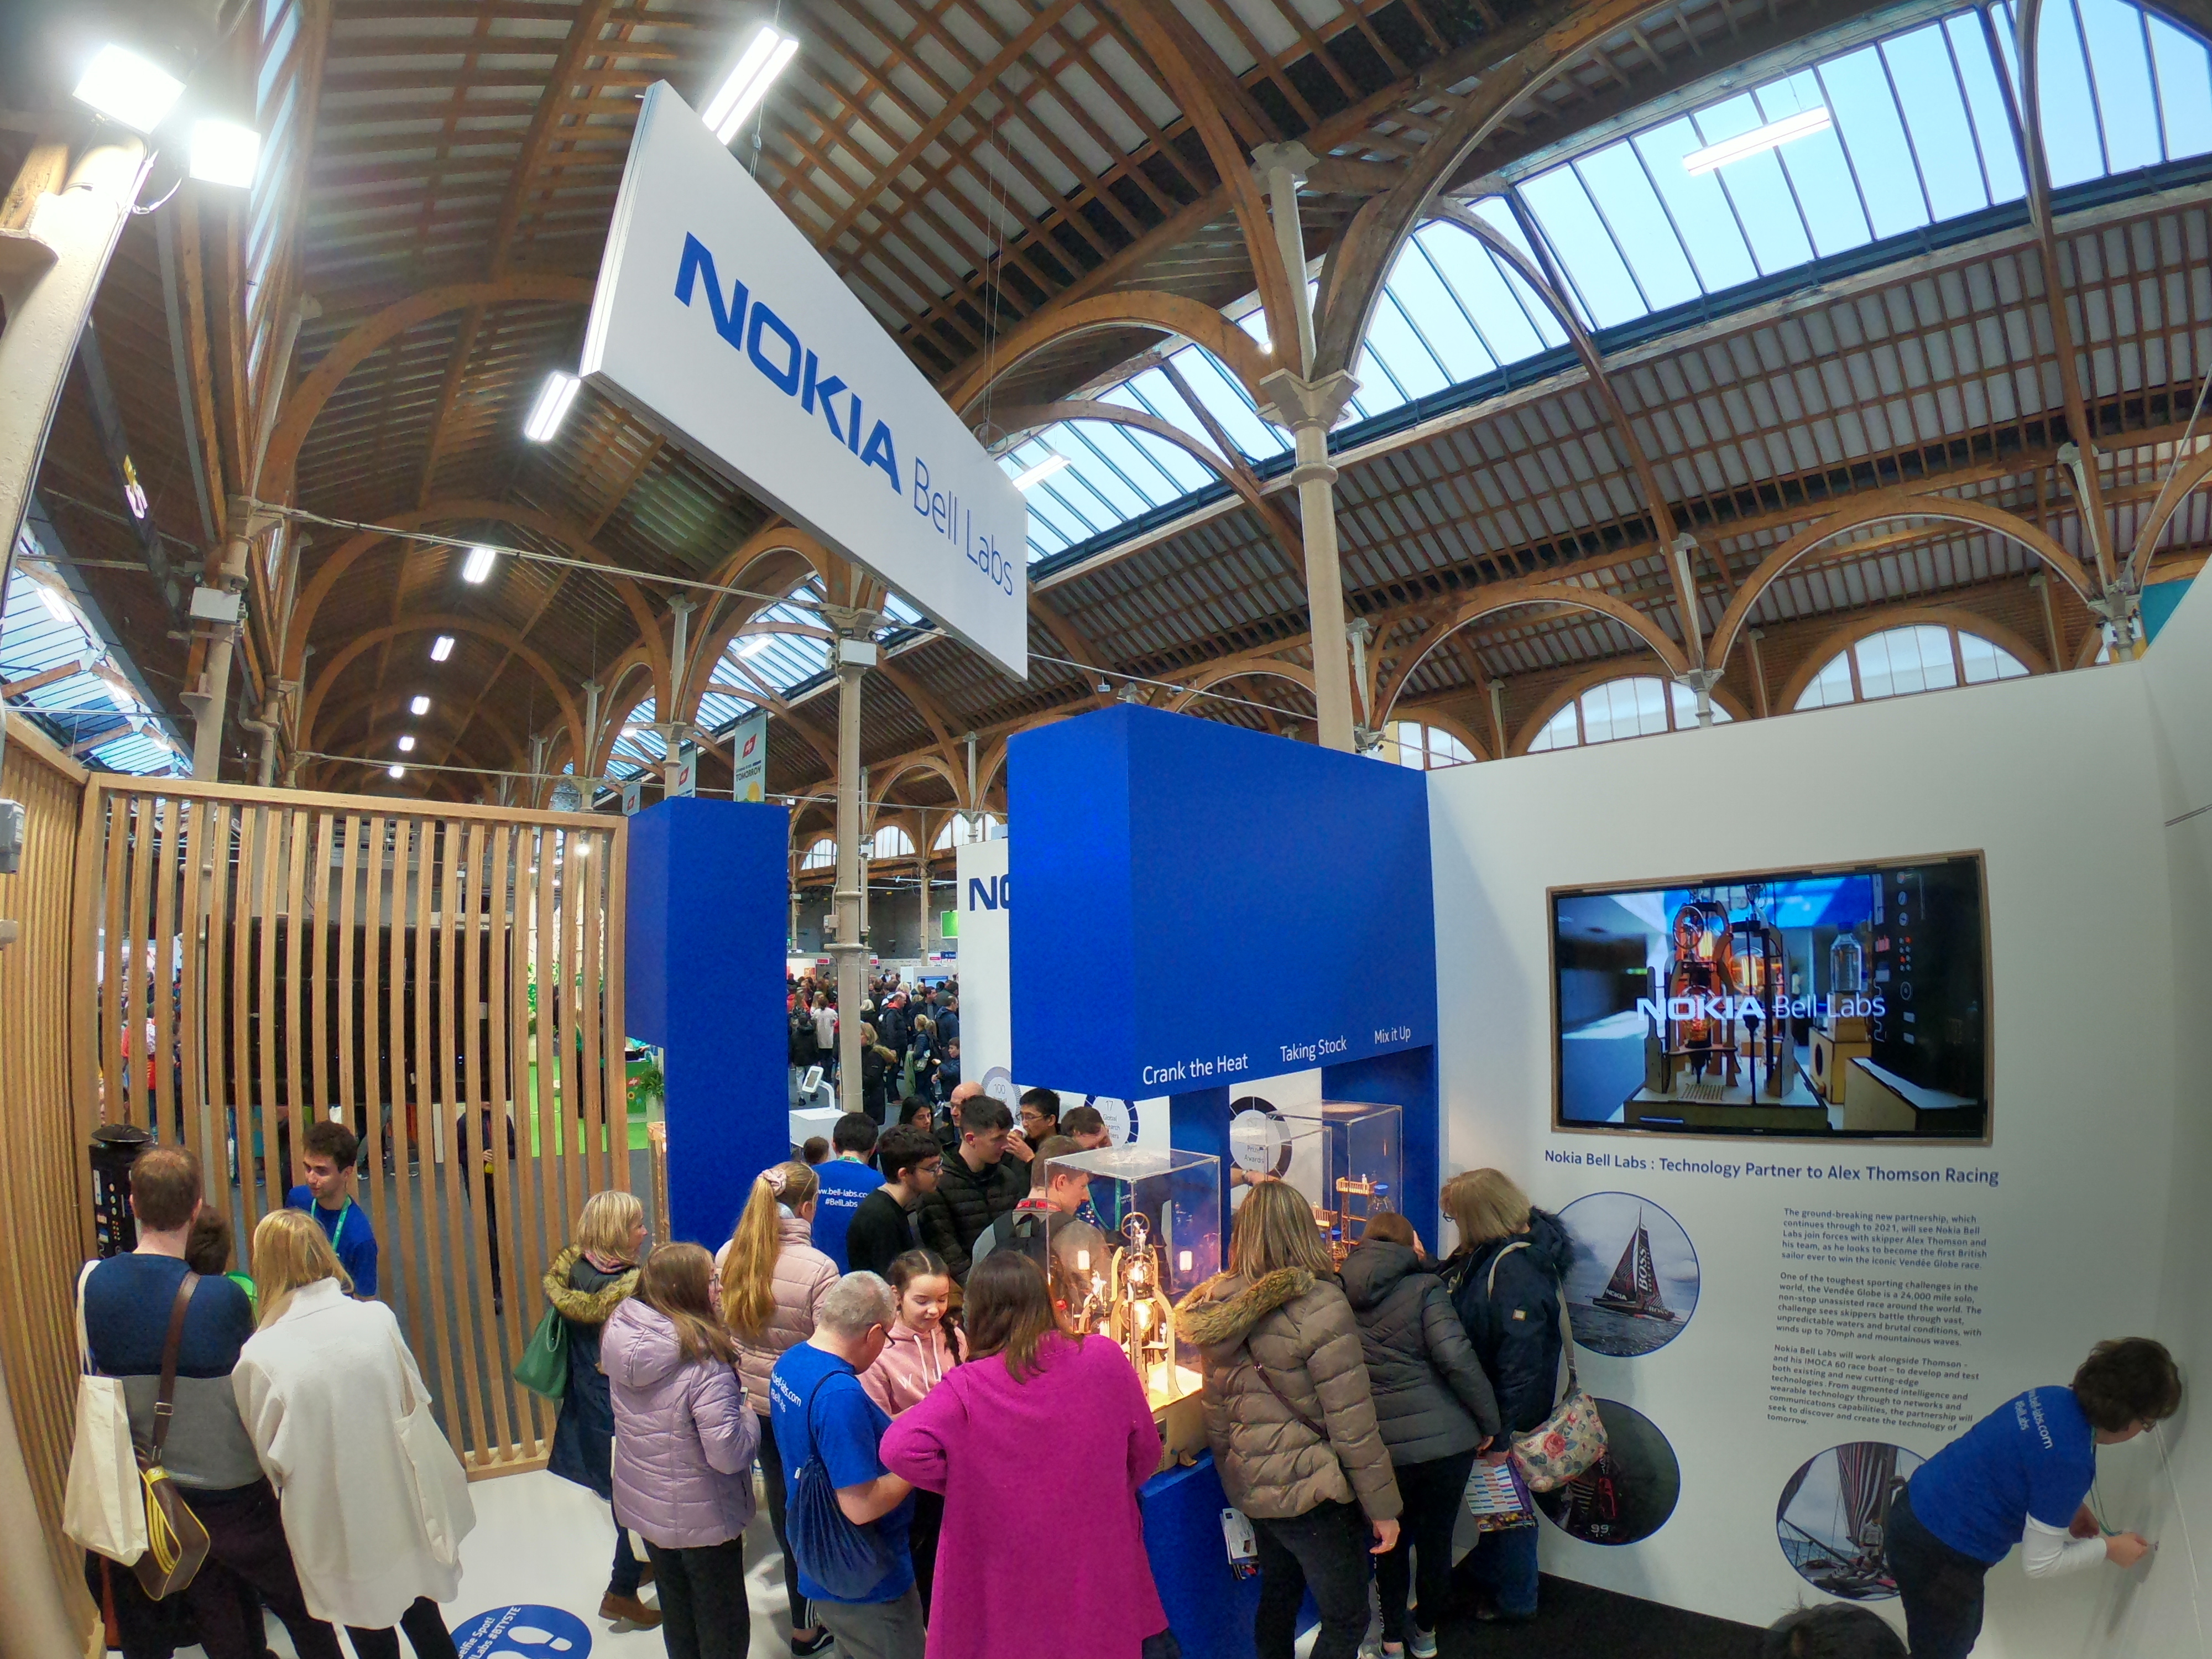 Image of the Nokia Bell interactive stall at the BT Young Scientist and Technology Exhibition